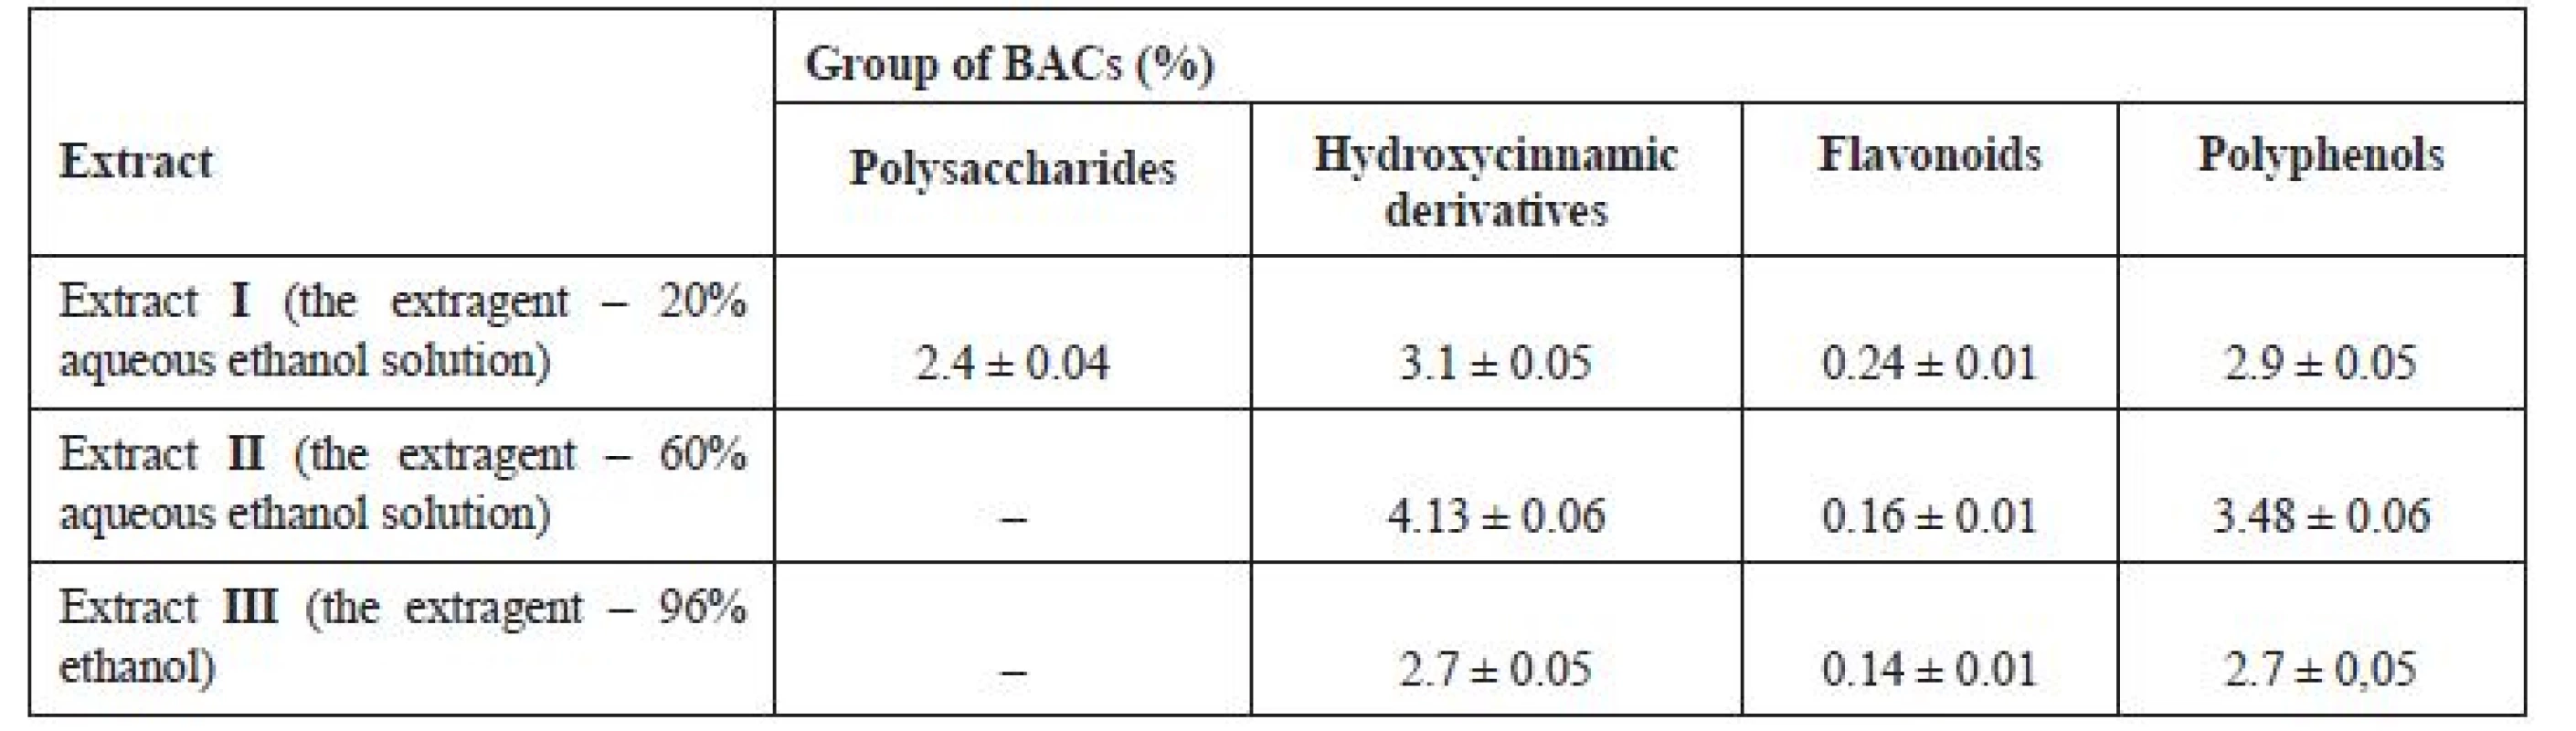 The content of main groups of BACs in G. verum herb fluid ethanolic extracts